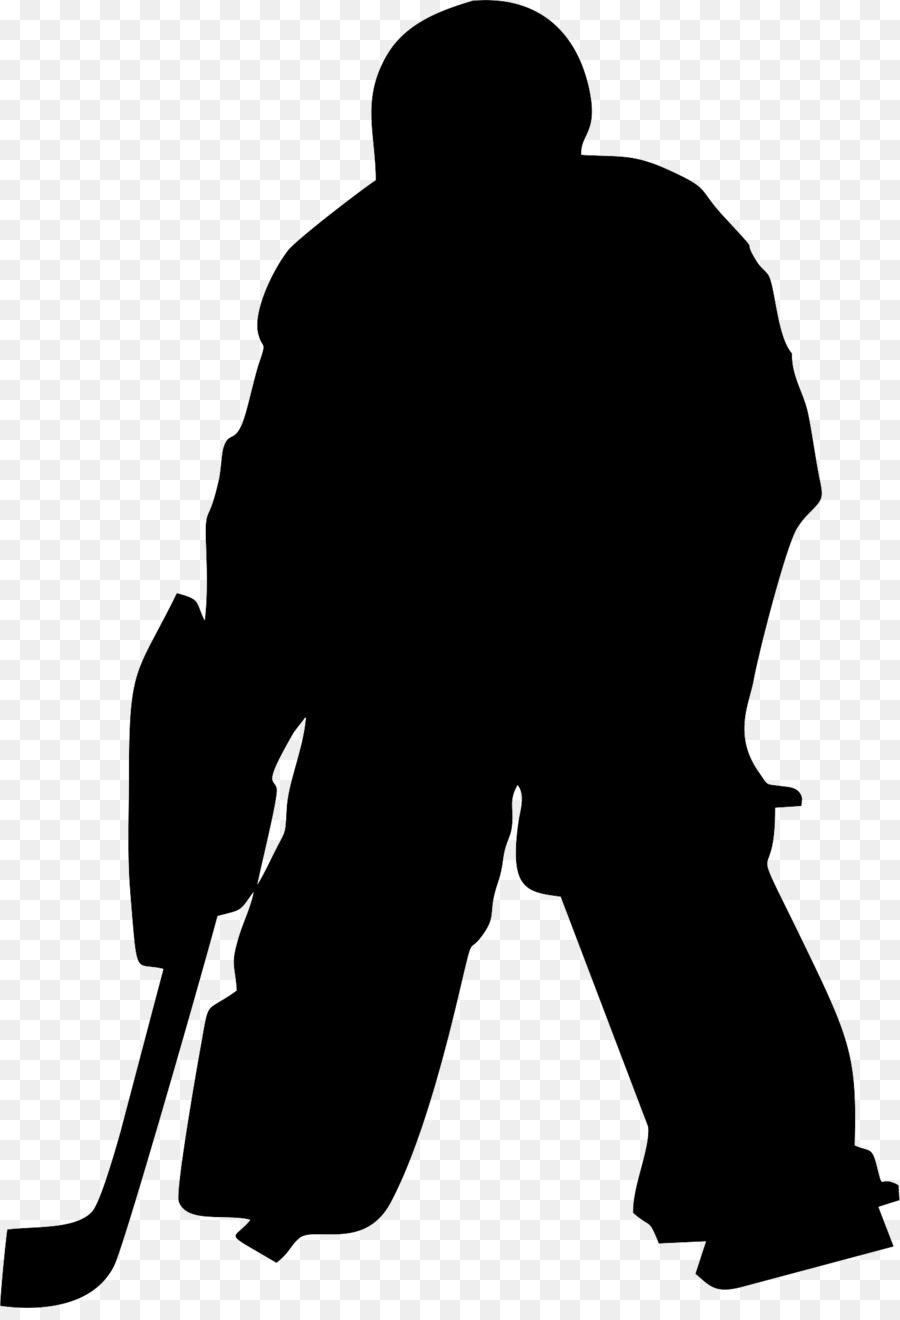 Goaltender Silhouette Field hockey Ice hockey - Silhouette png download - 1465*2129 - Free Transparent Goaltender png Download.